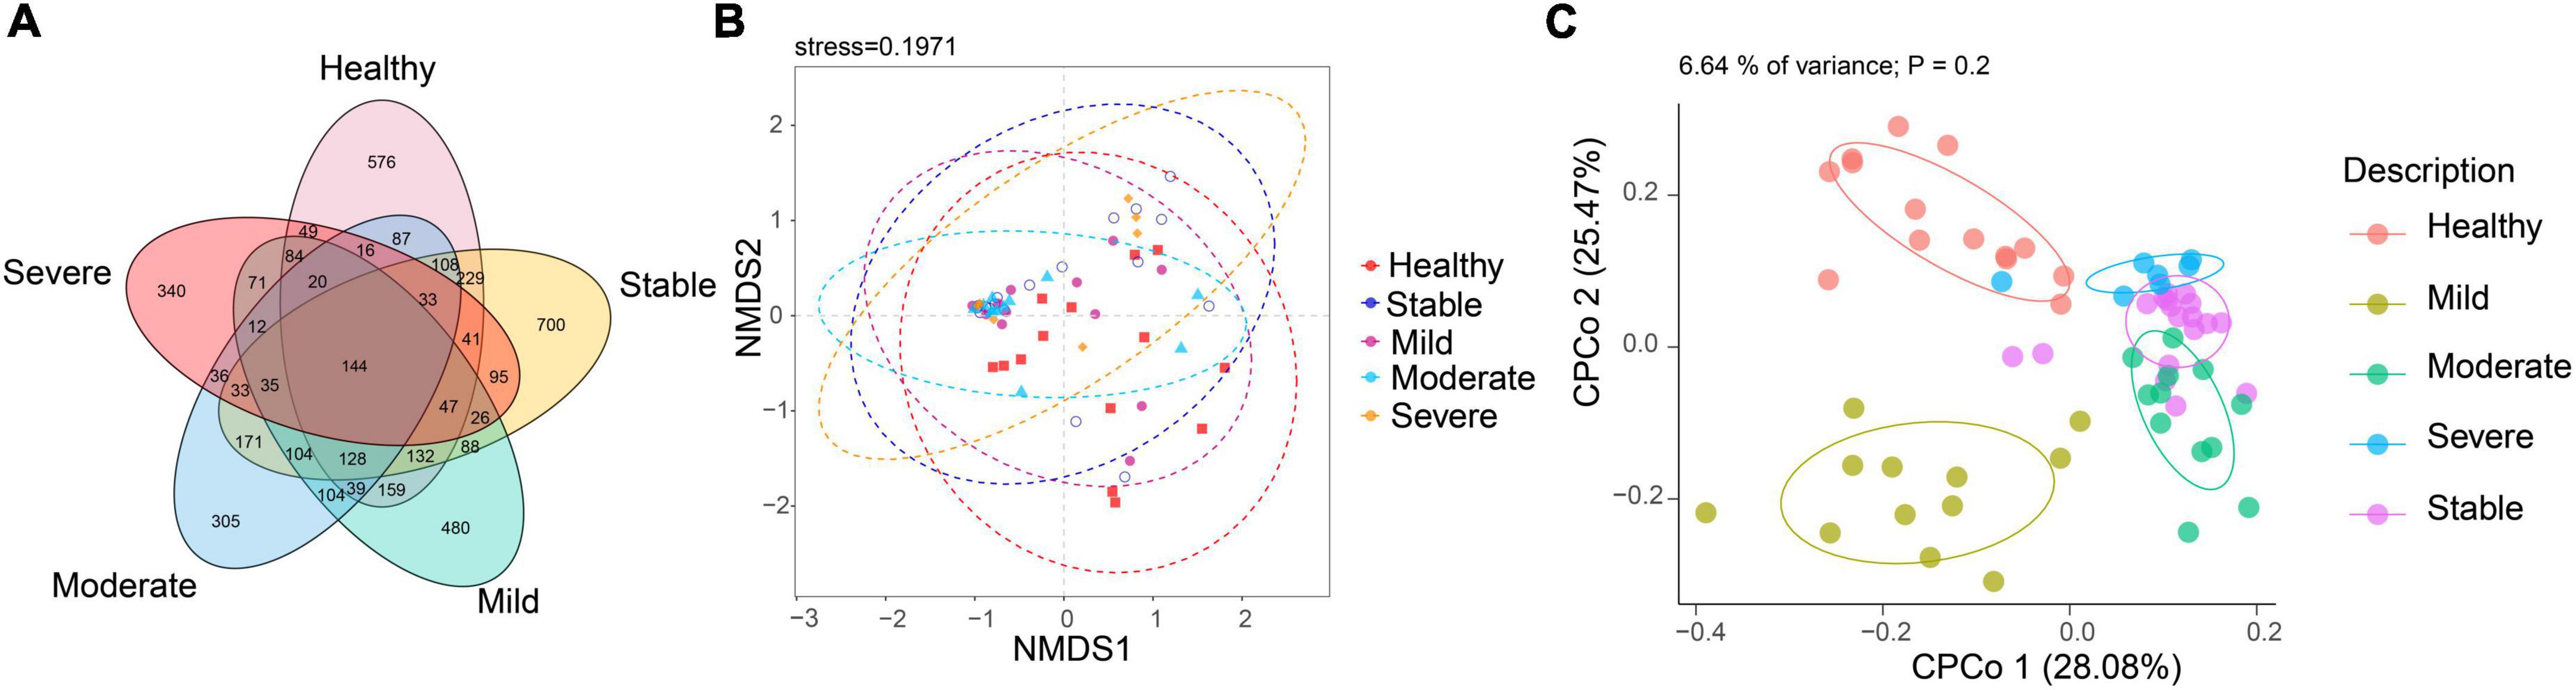 Frontiers Fungal Gut Microbiota Dysbiosis In Systemic Lupus Erythematosus